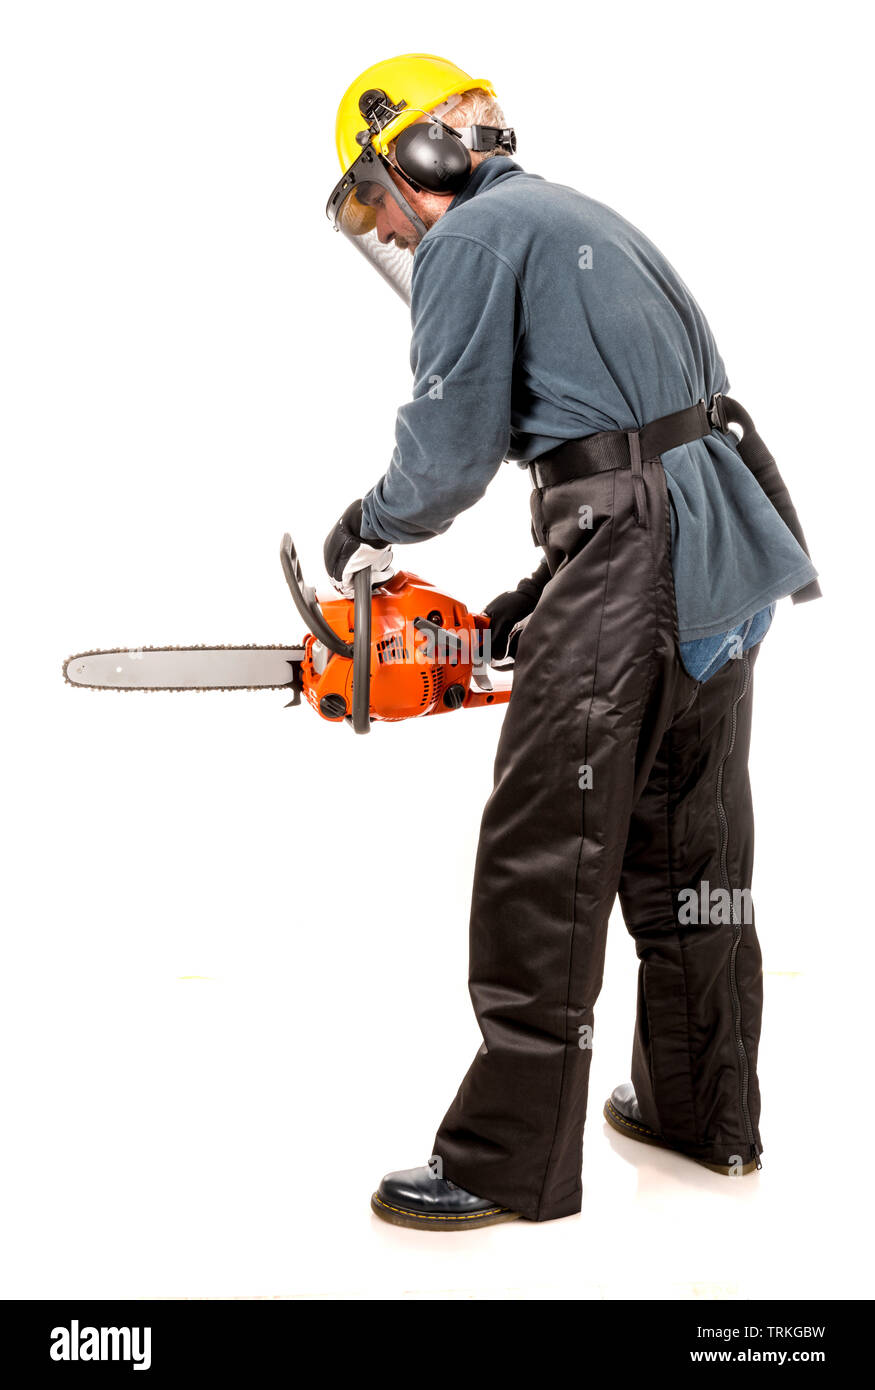 Man in safety gear demonstrating how to hold a chainsaw safely Stock Photo